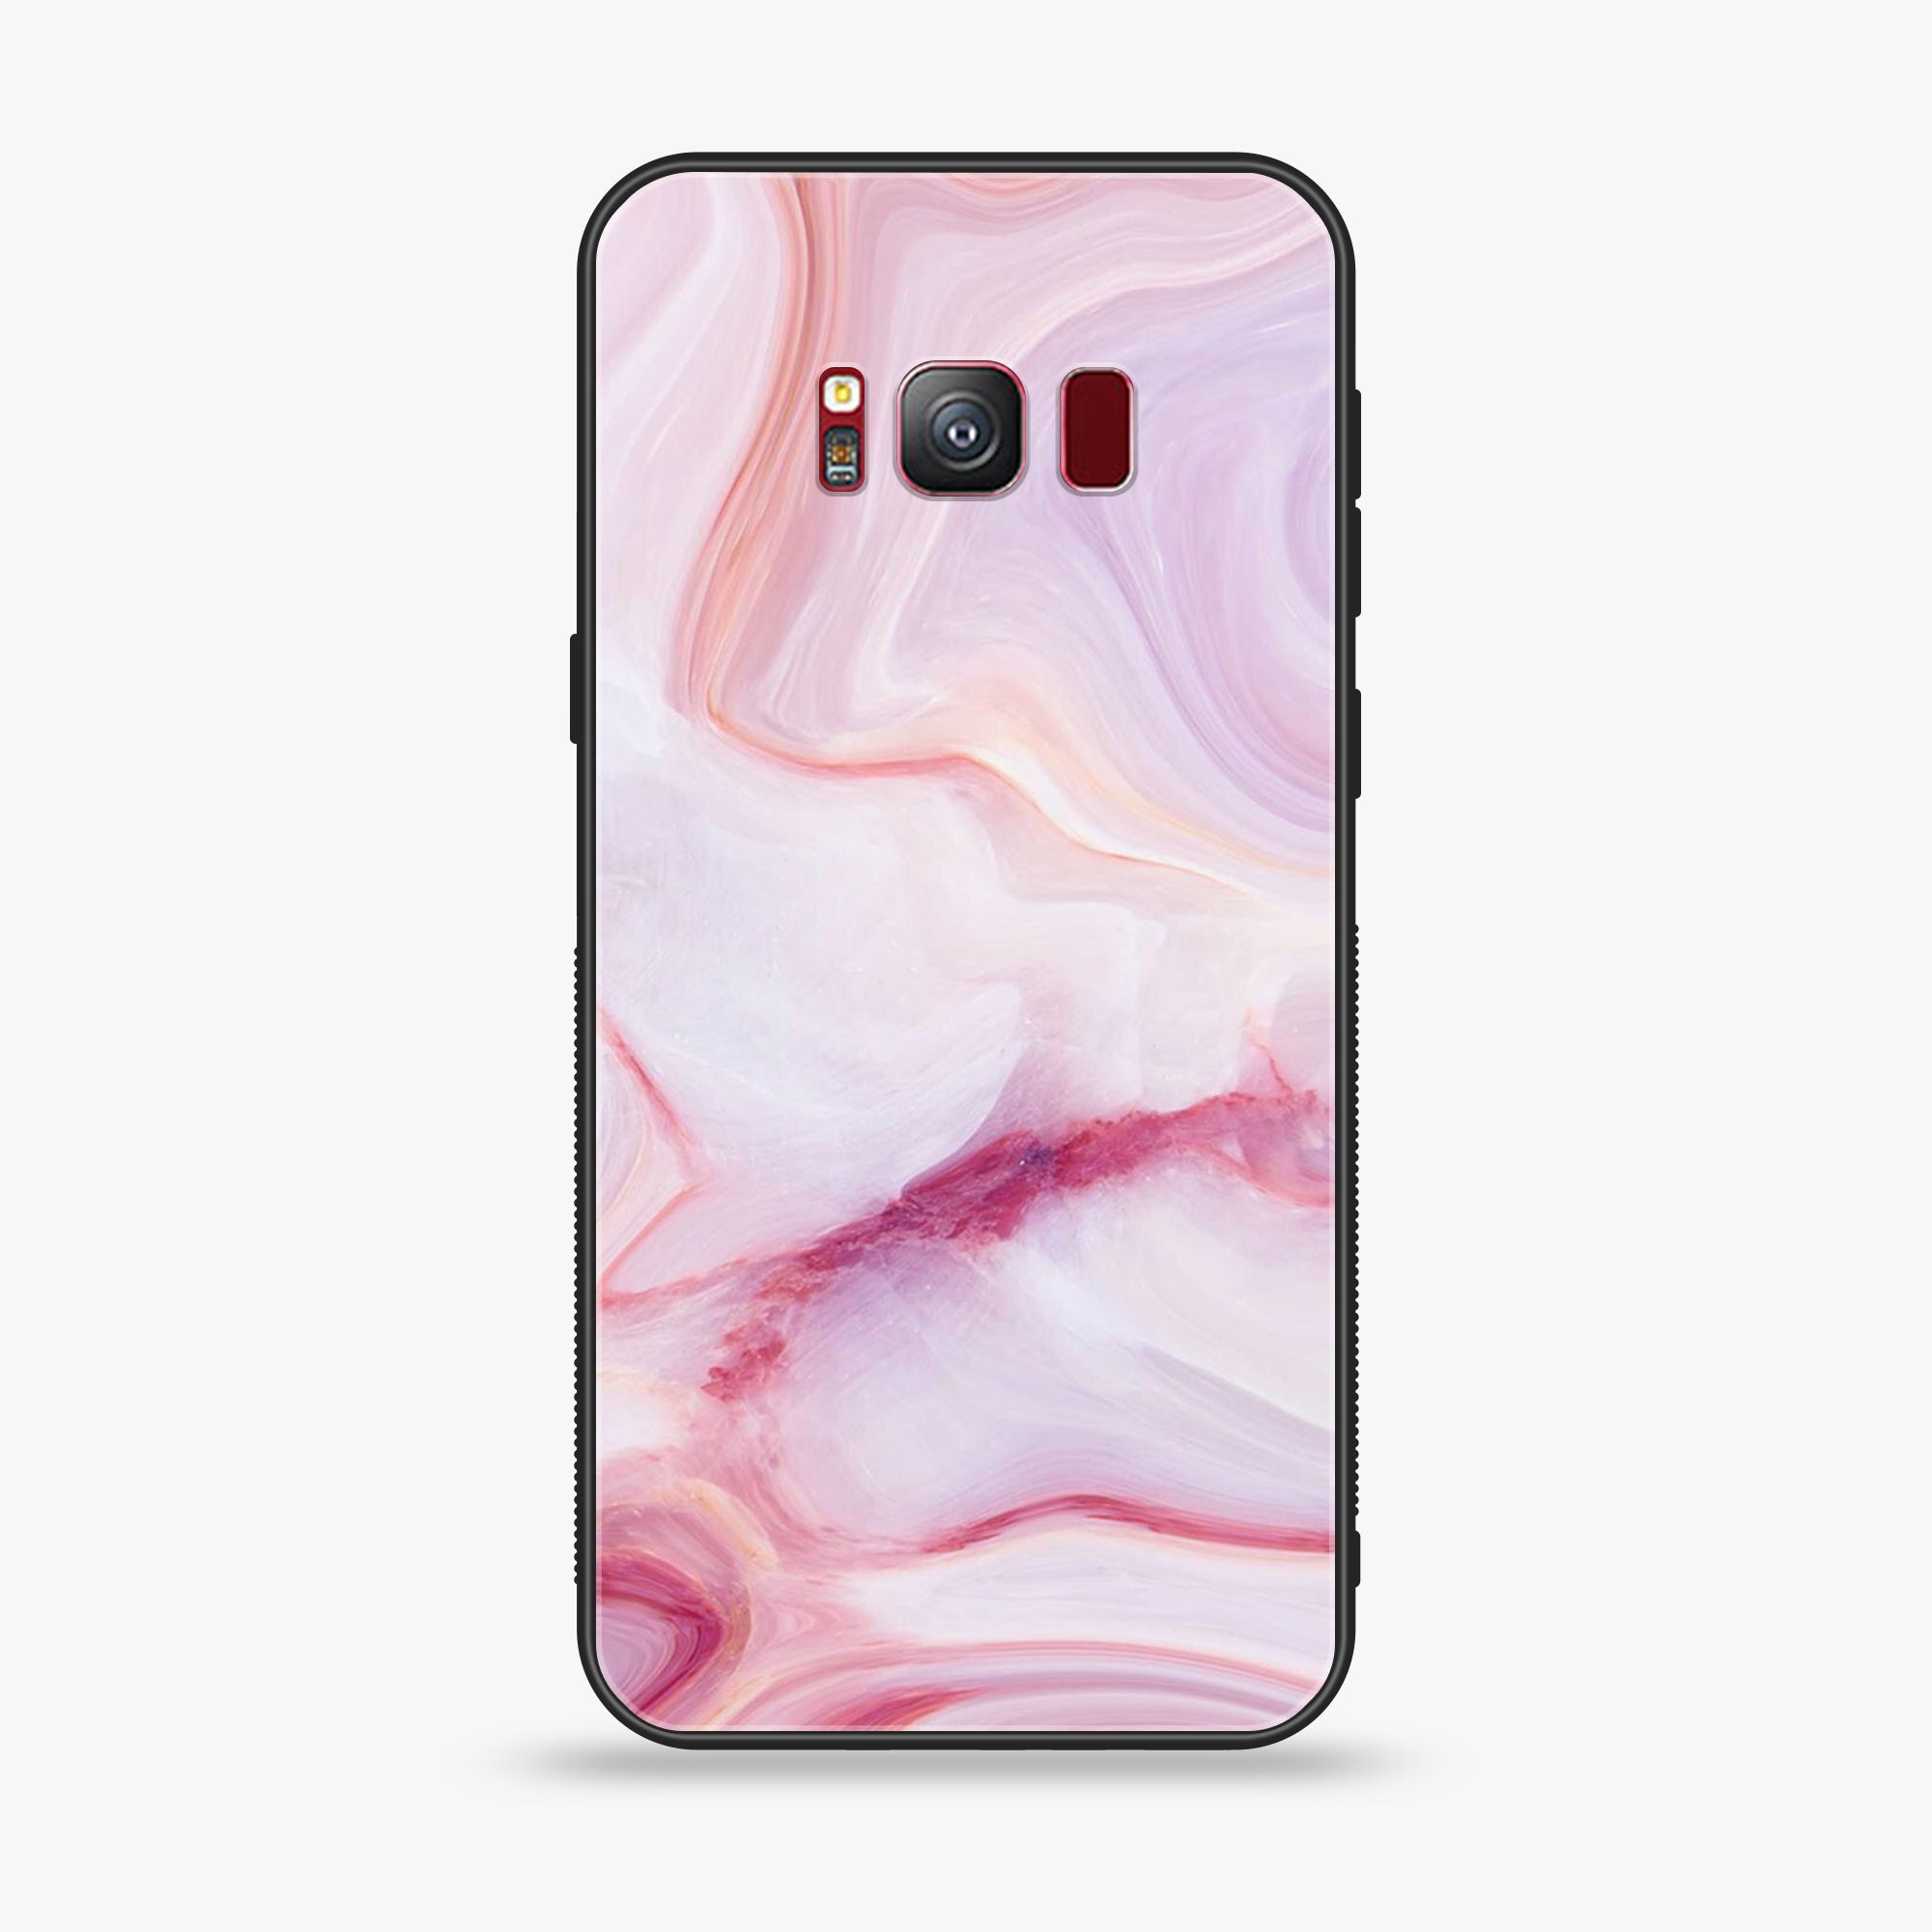 Galaxy S8 - Pink Marble Series - Premium Printed Glass soft Bumper shock Proof Case